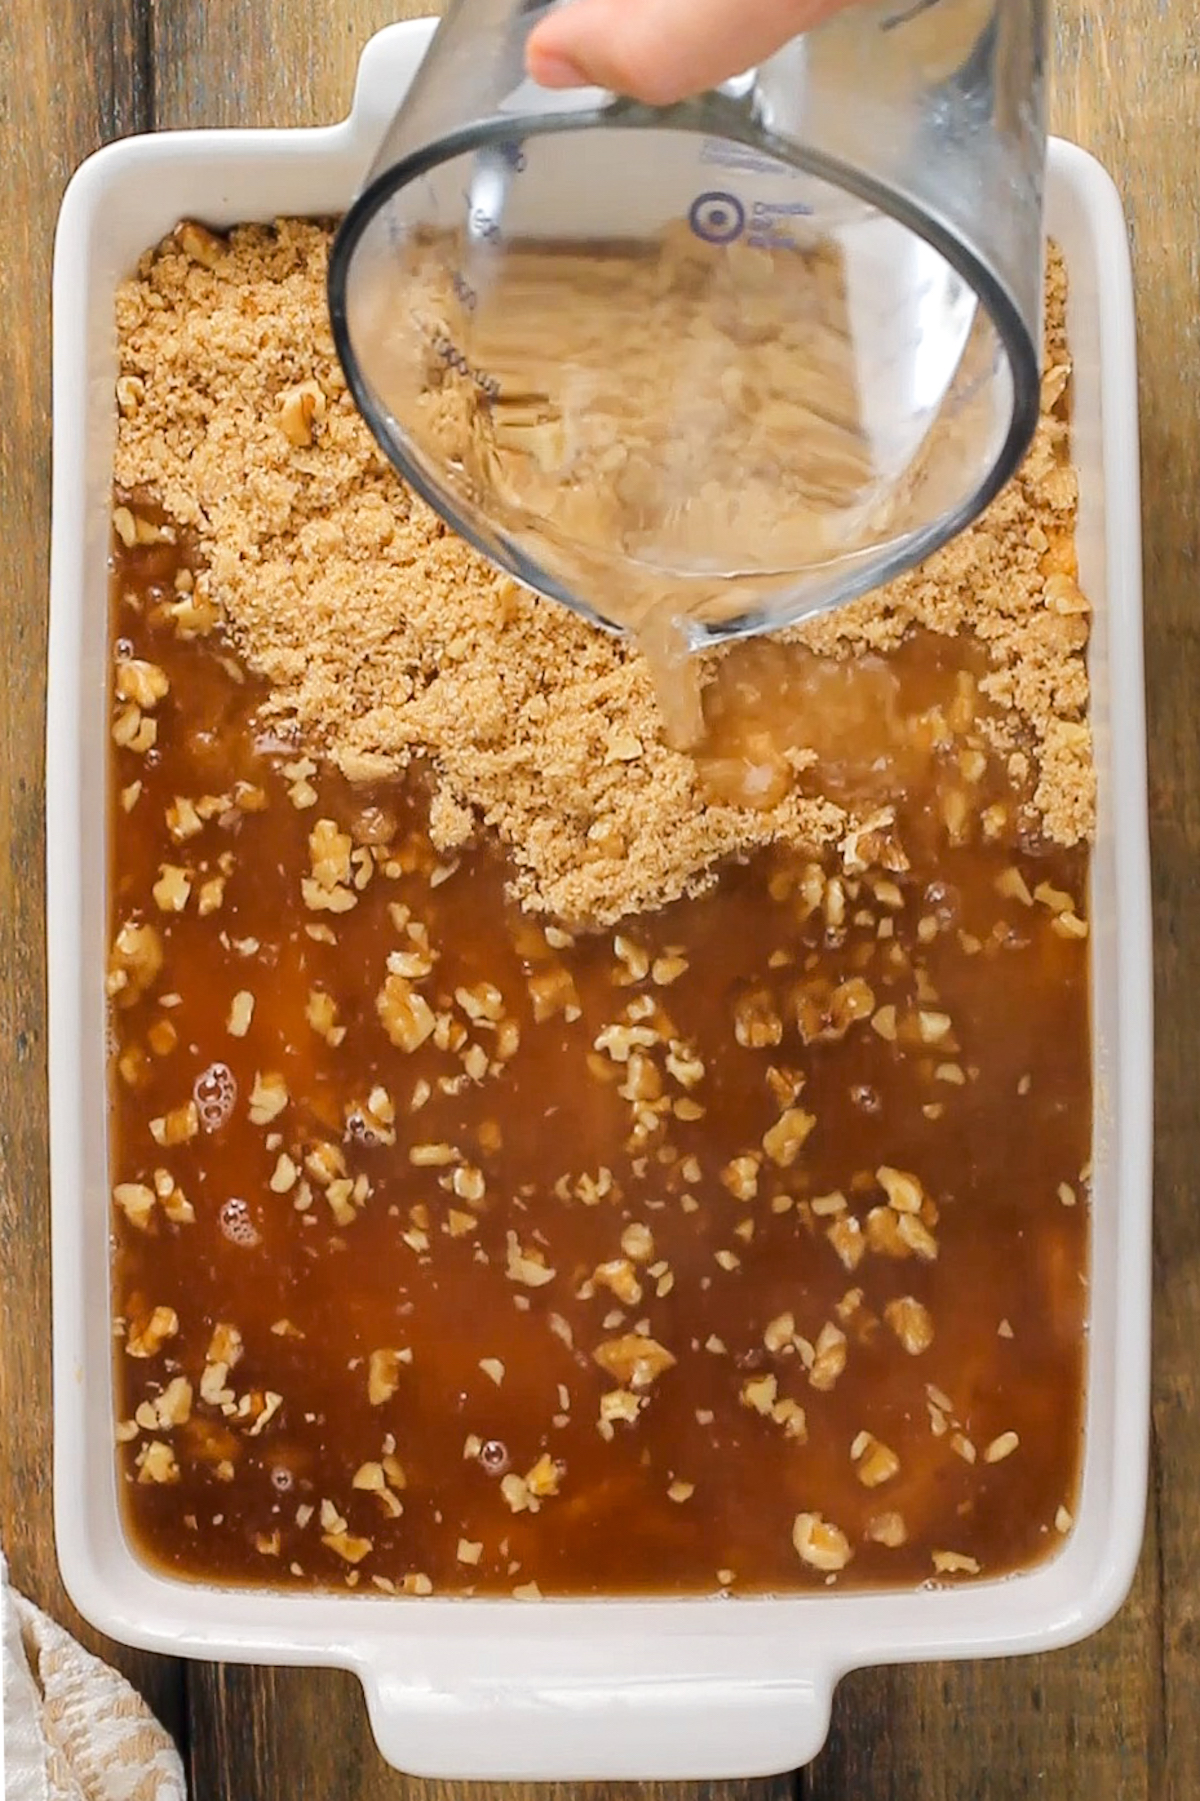 Hot water being poured into a casserole with brown sugar and pecans.